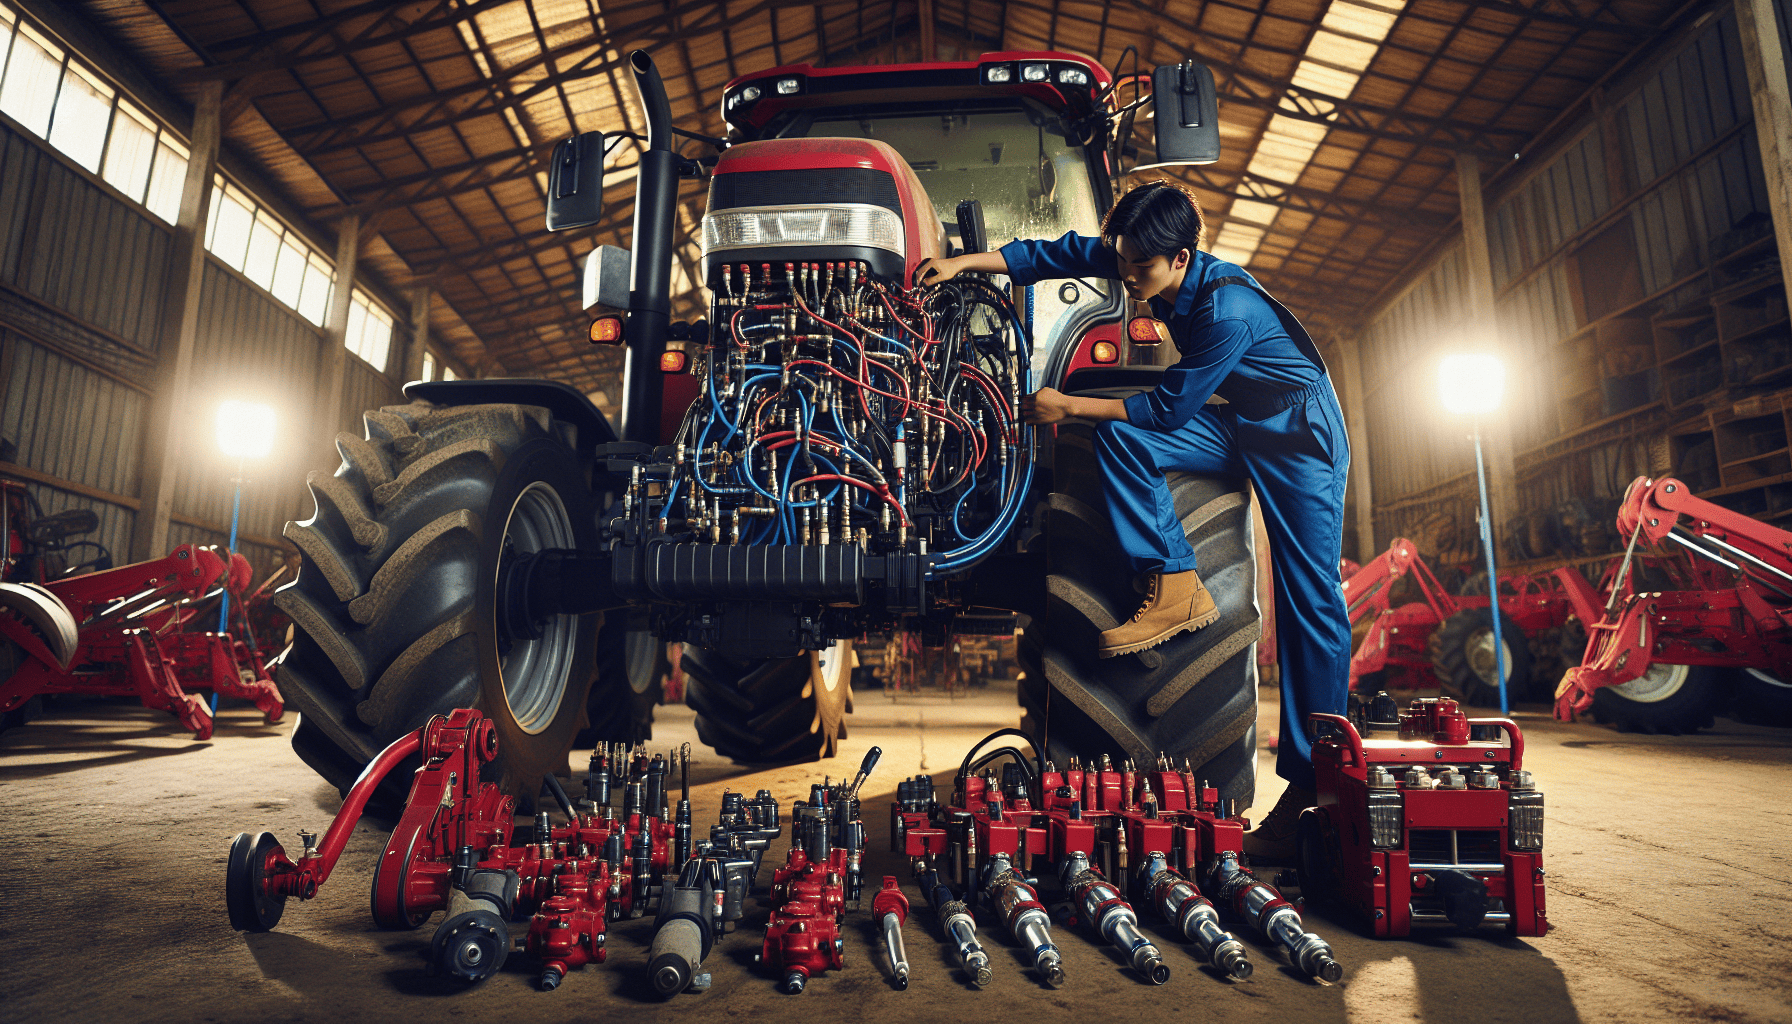 Testing hydraulic system of a tractor